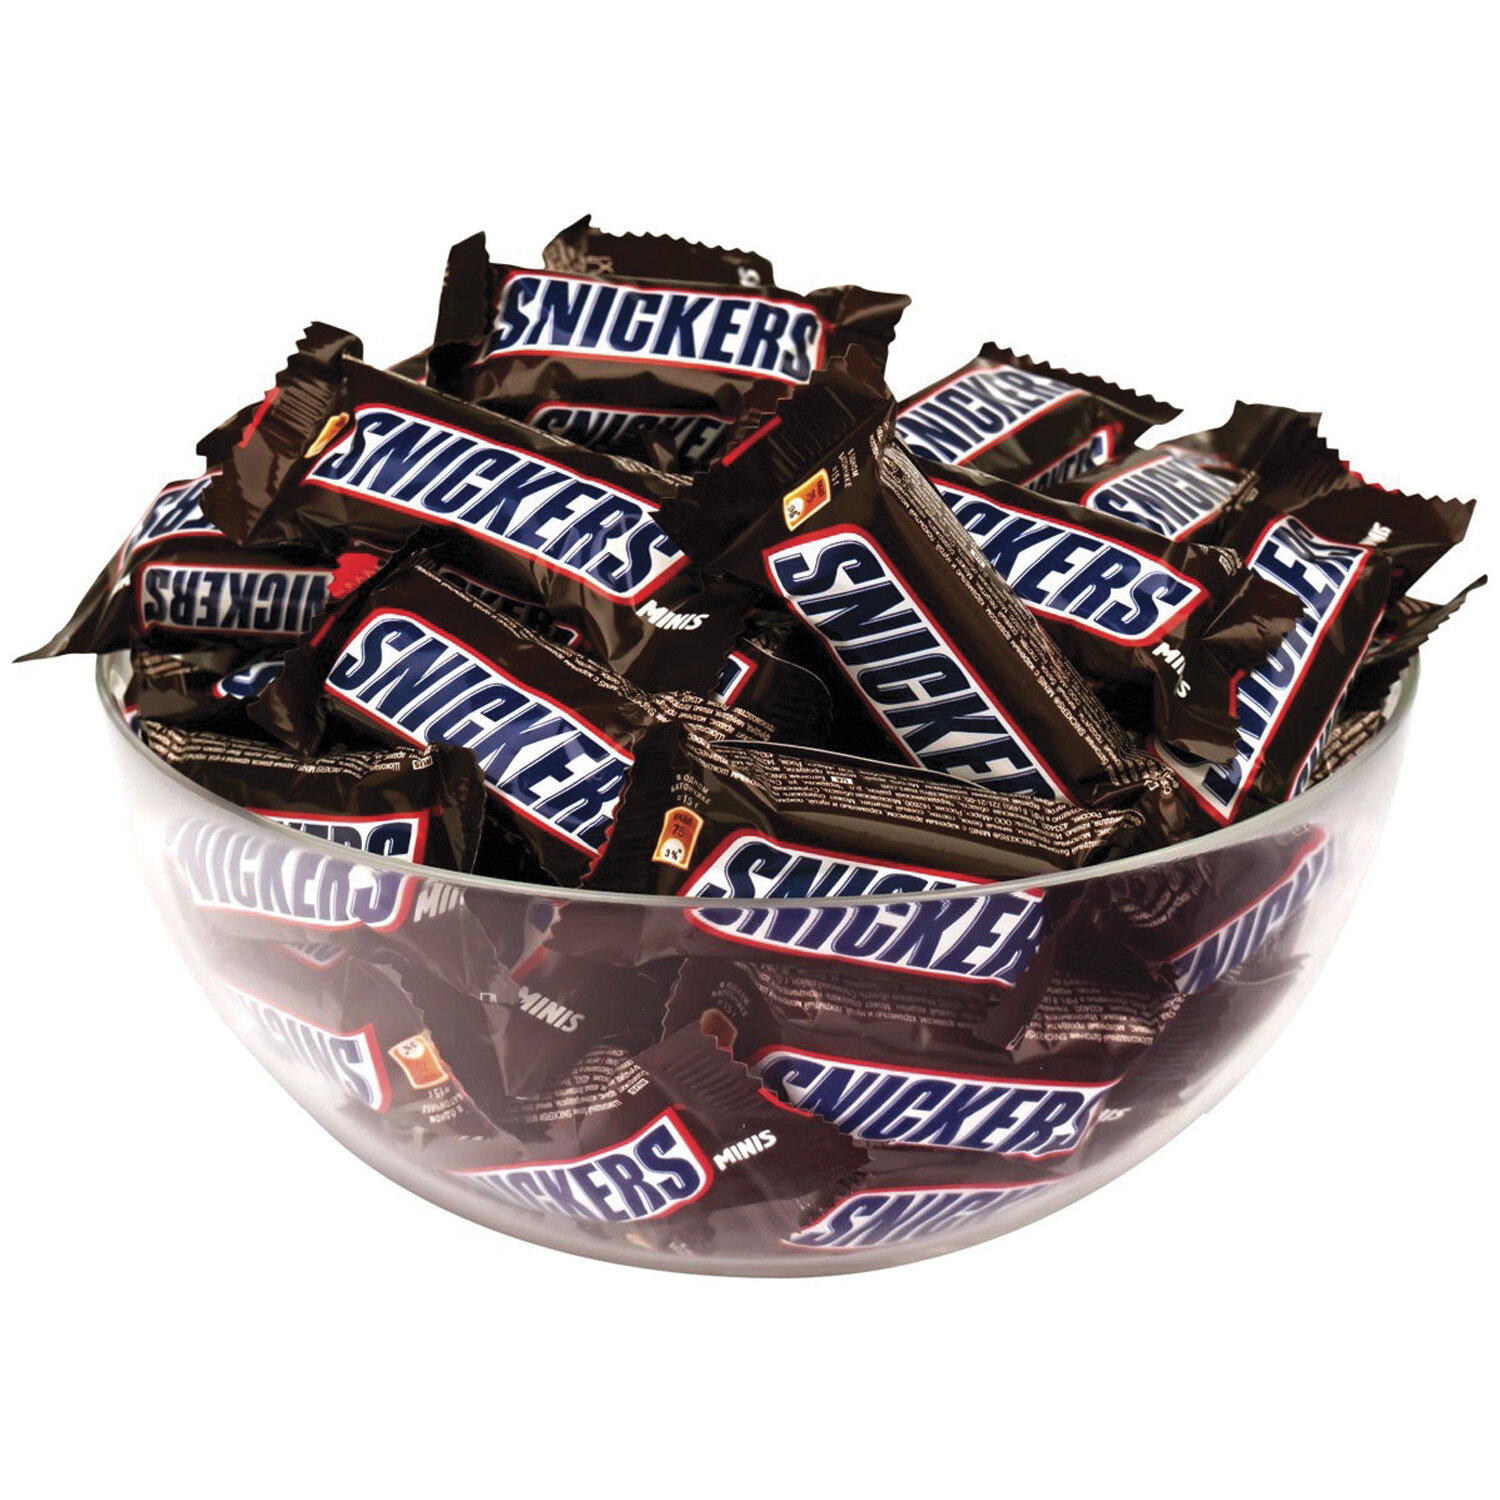 Snickers Minis, 1 кг